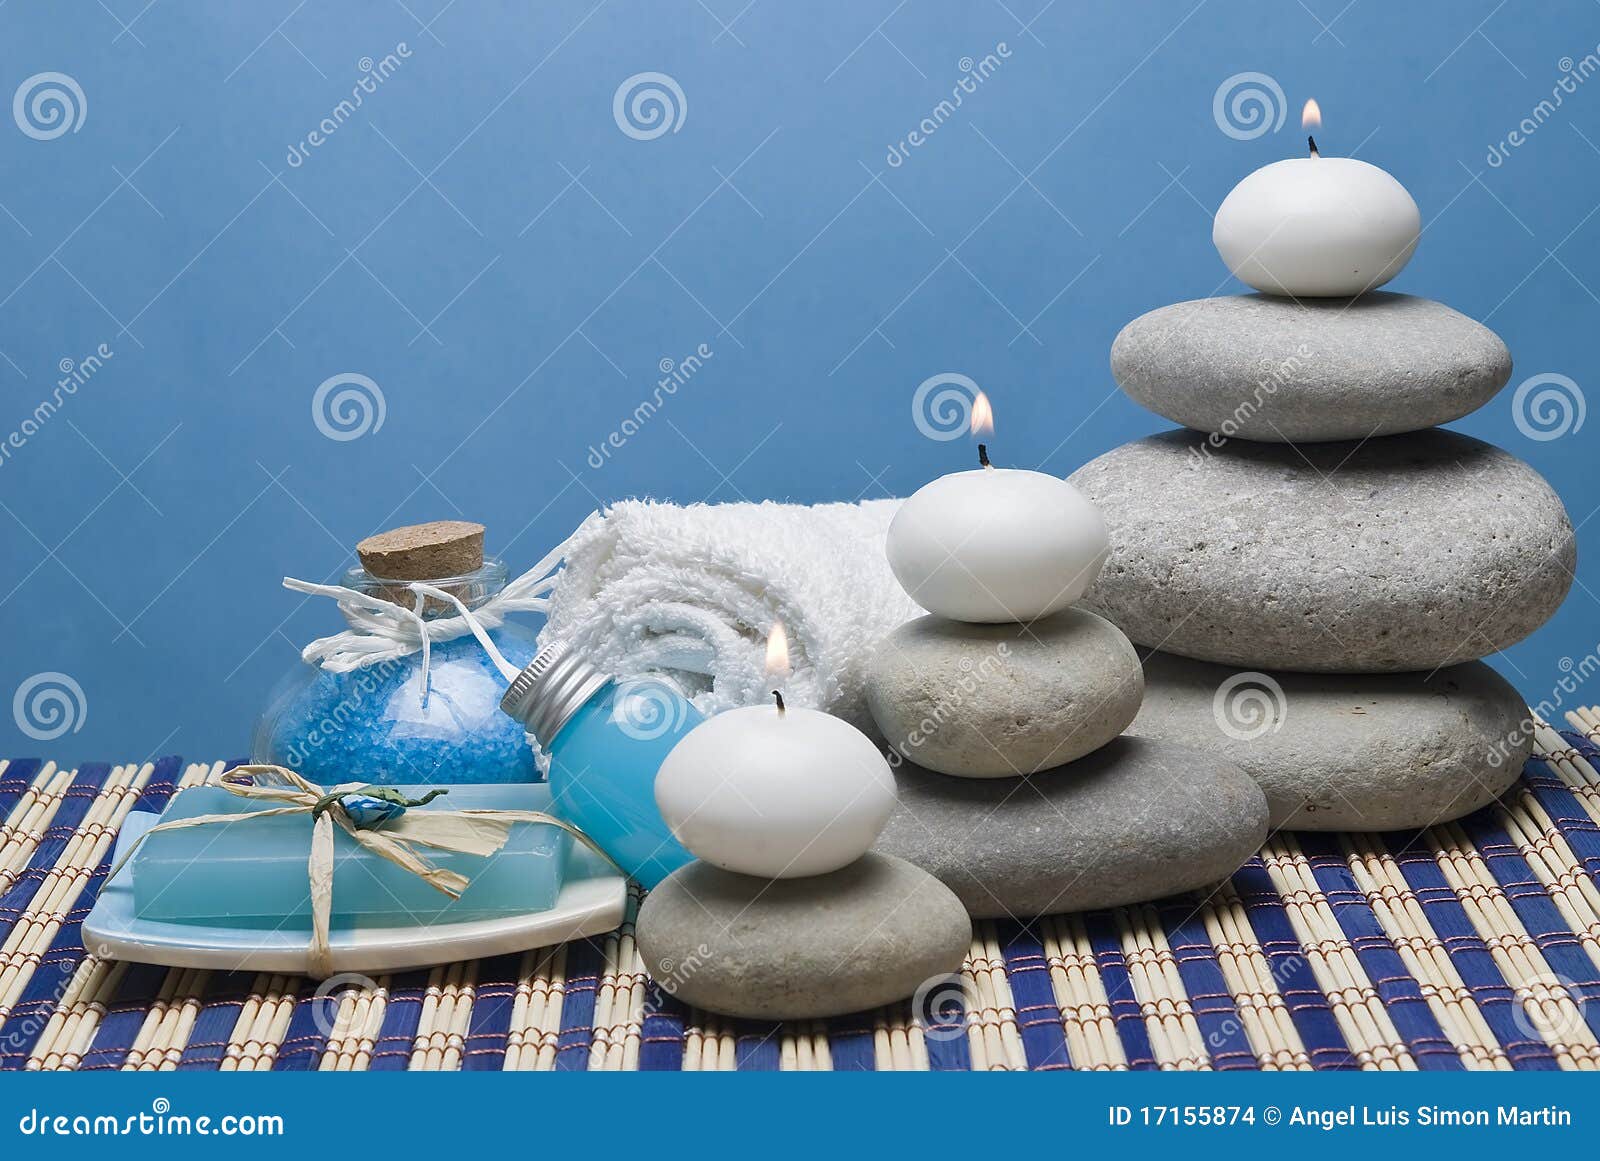 Candles in the spa. Spa background with some blue hygiene items and some candles.